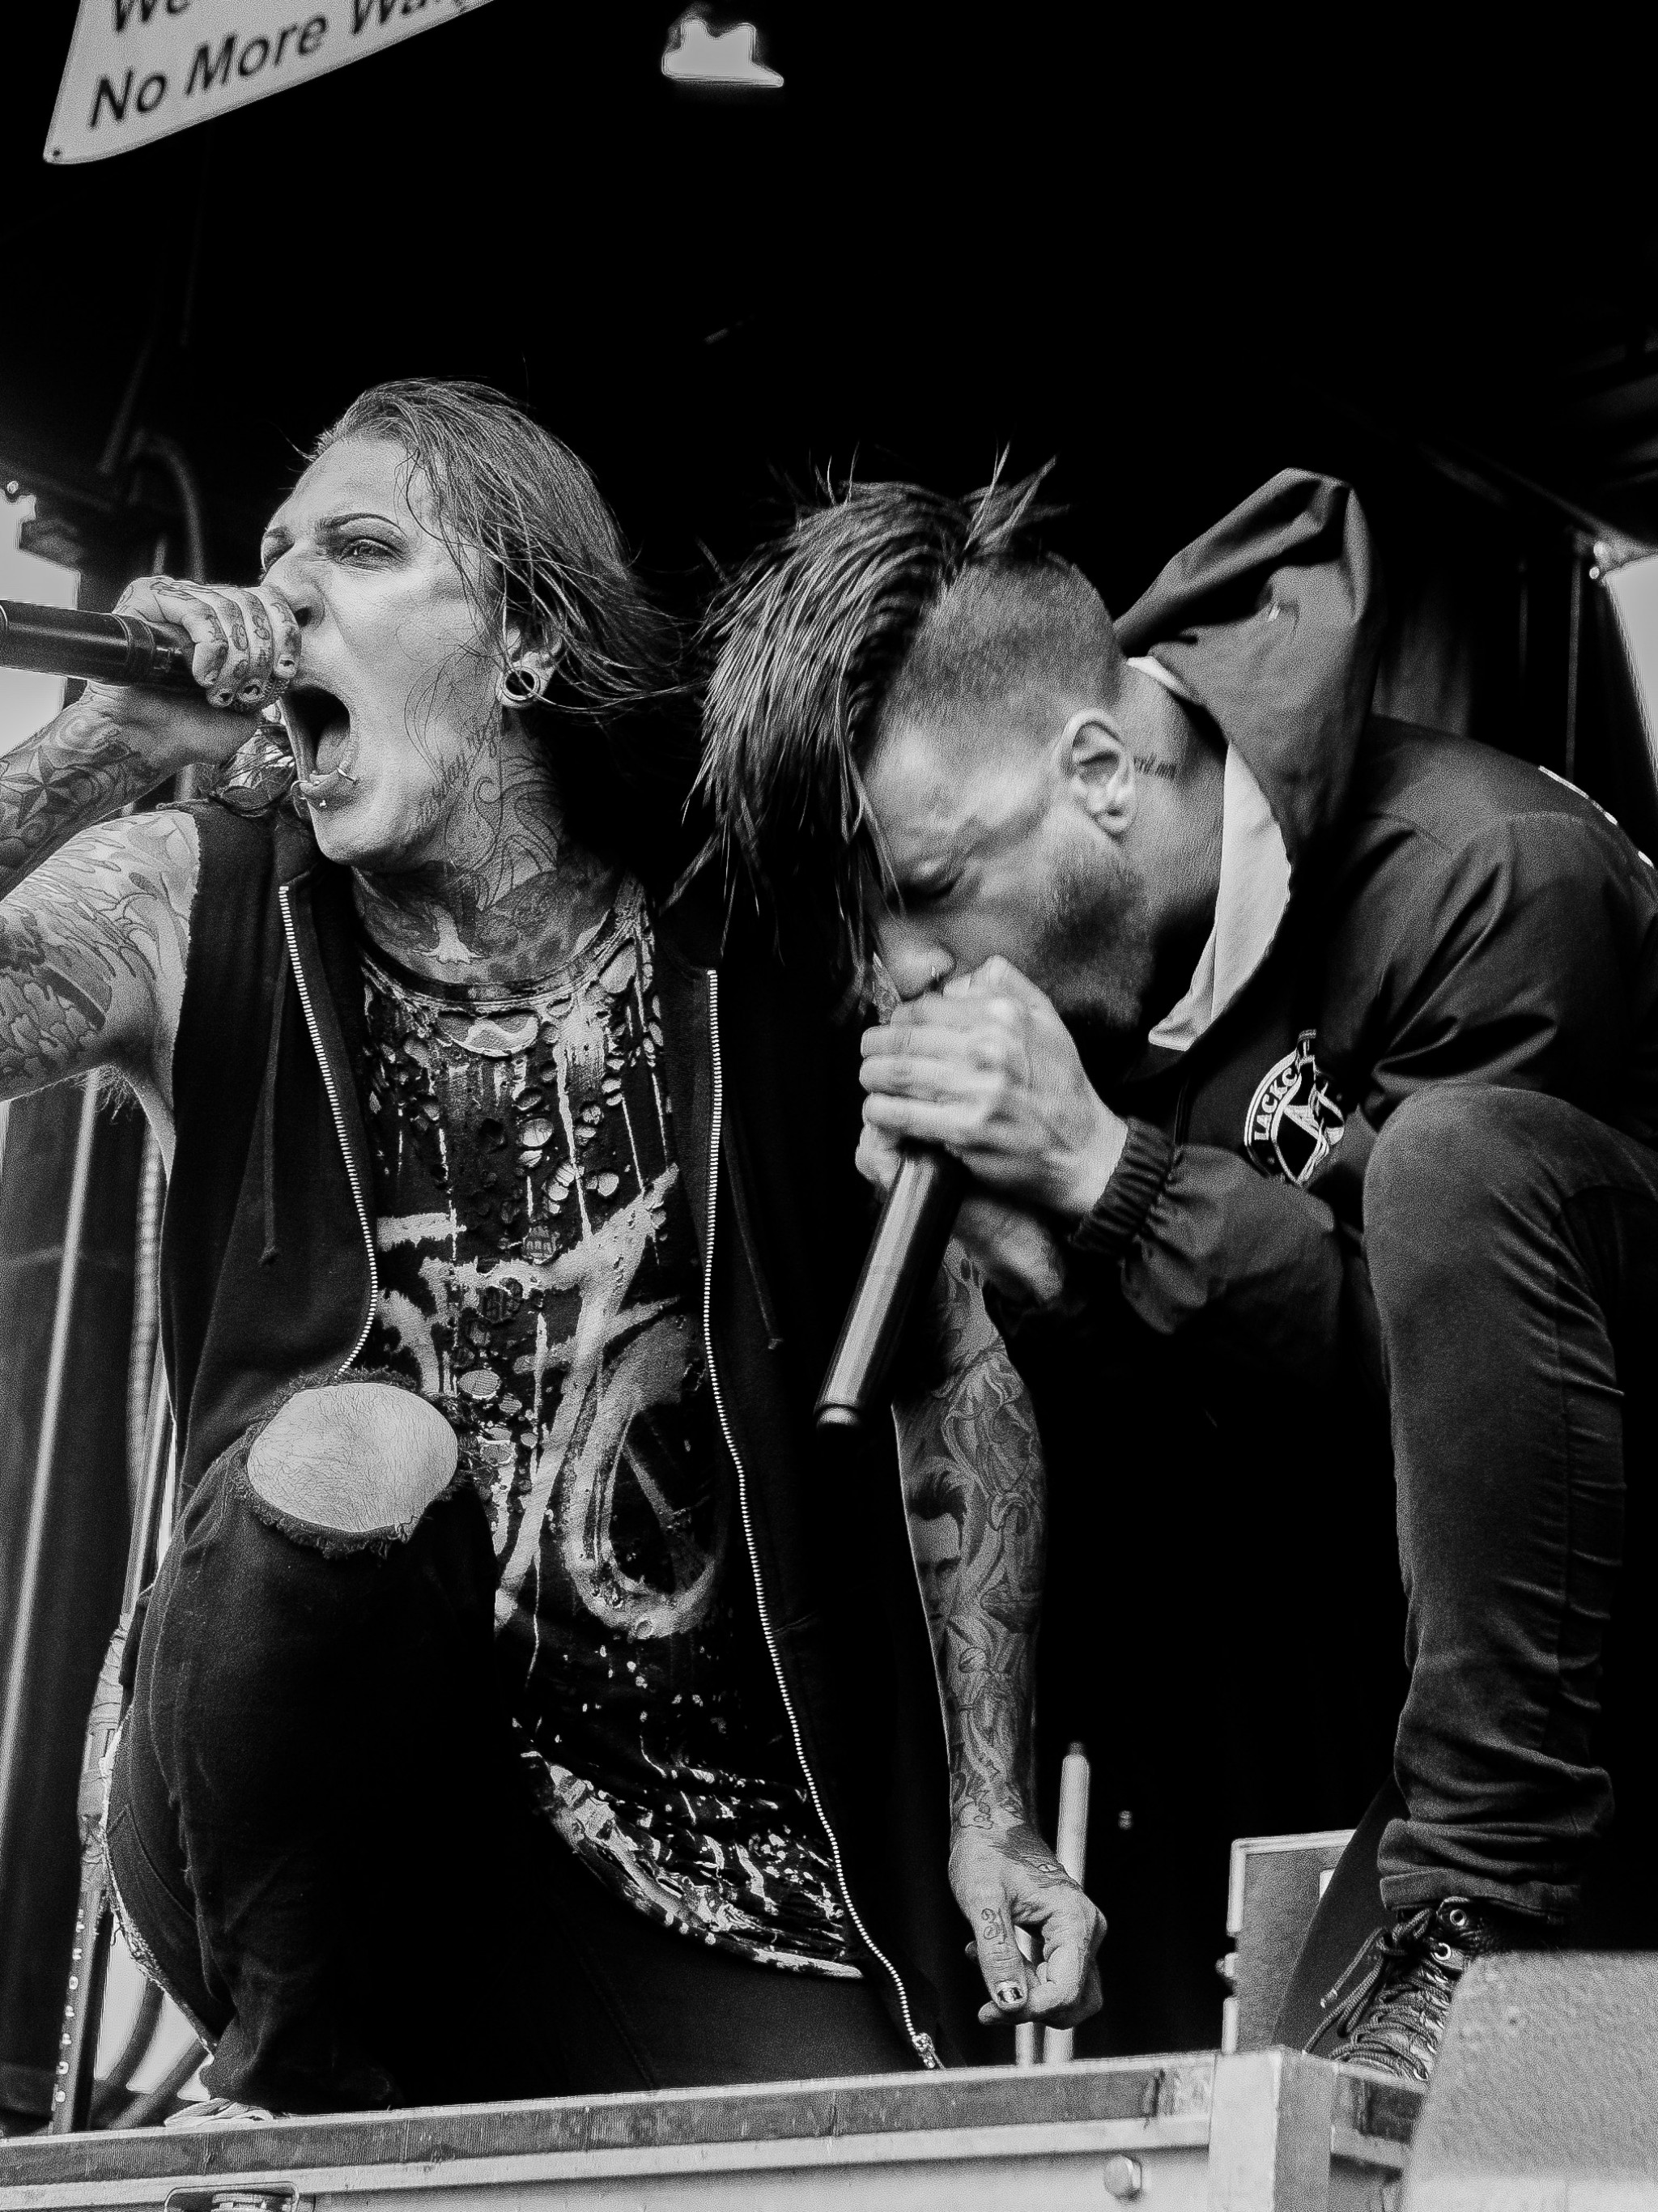 Download Motionless In White Voices Lyrics, Motionless - Motionless In White Voices , HD Wallpaper & Backgrounds